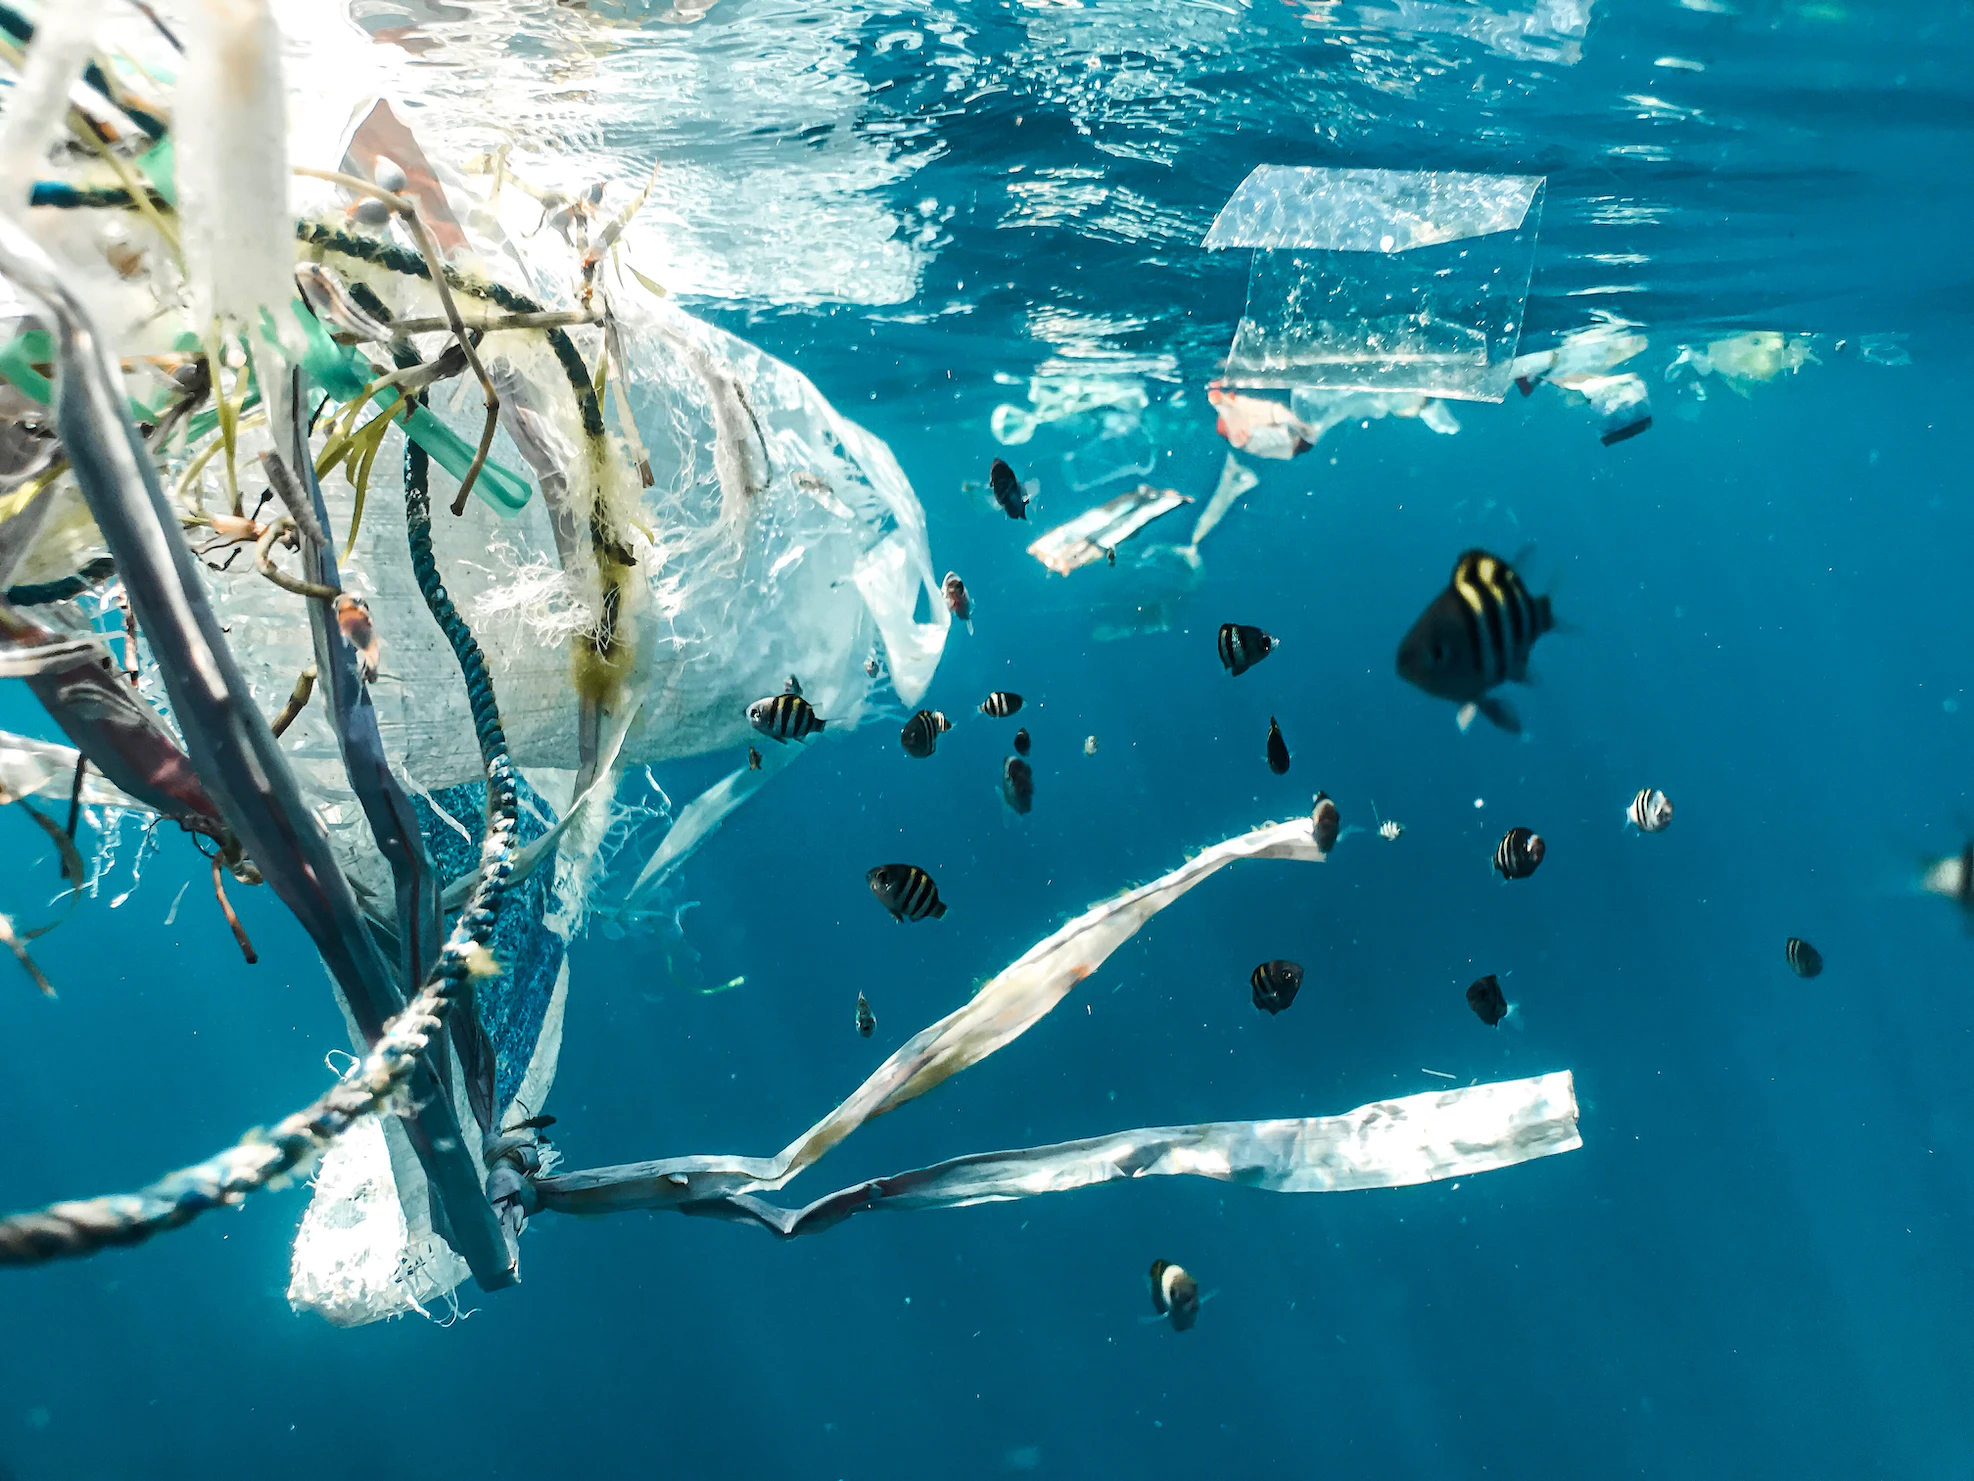 A surprising study: less plastic waste in the ocean than expected